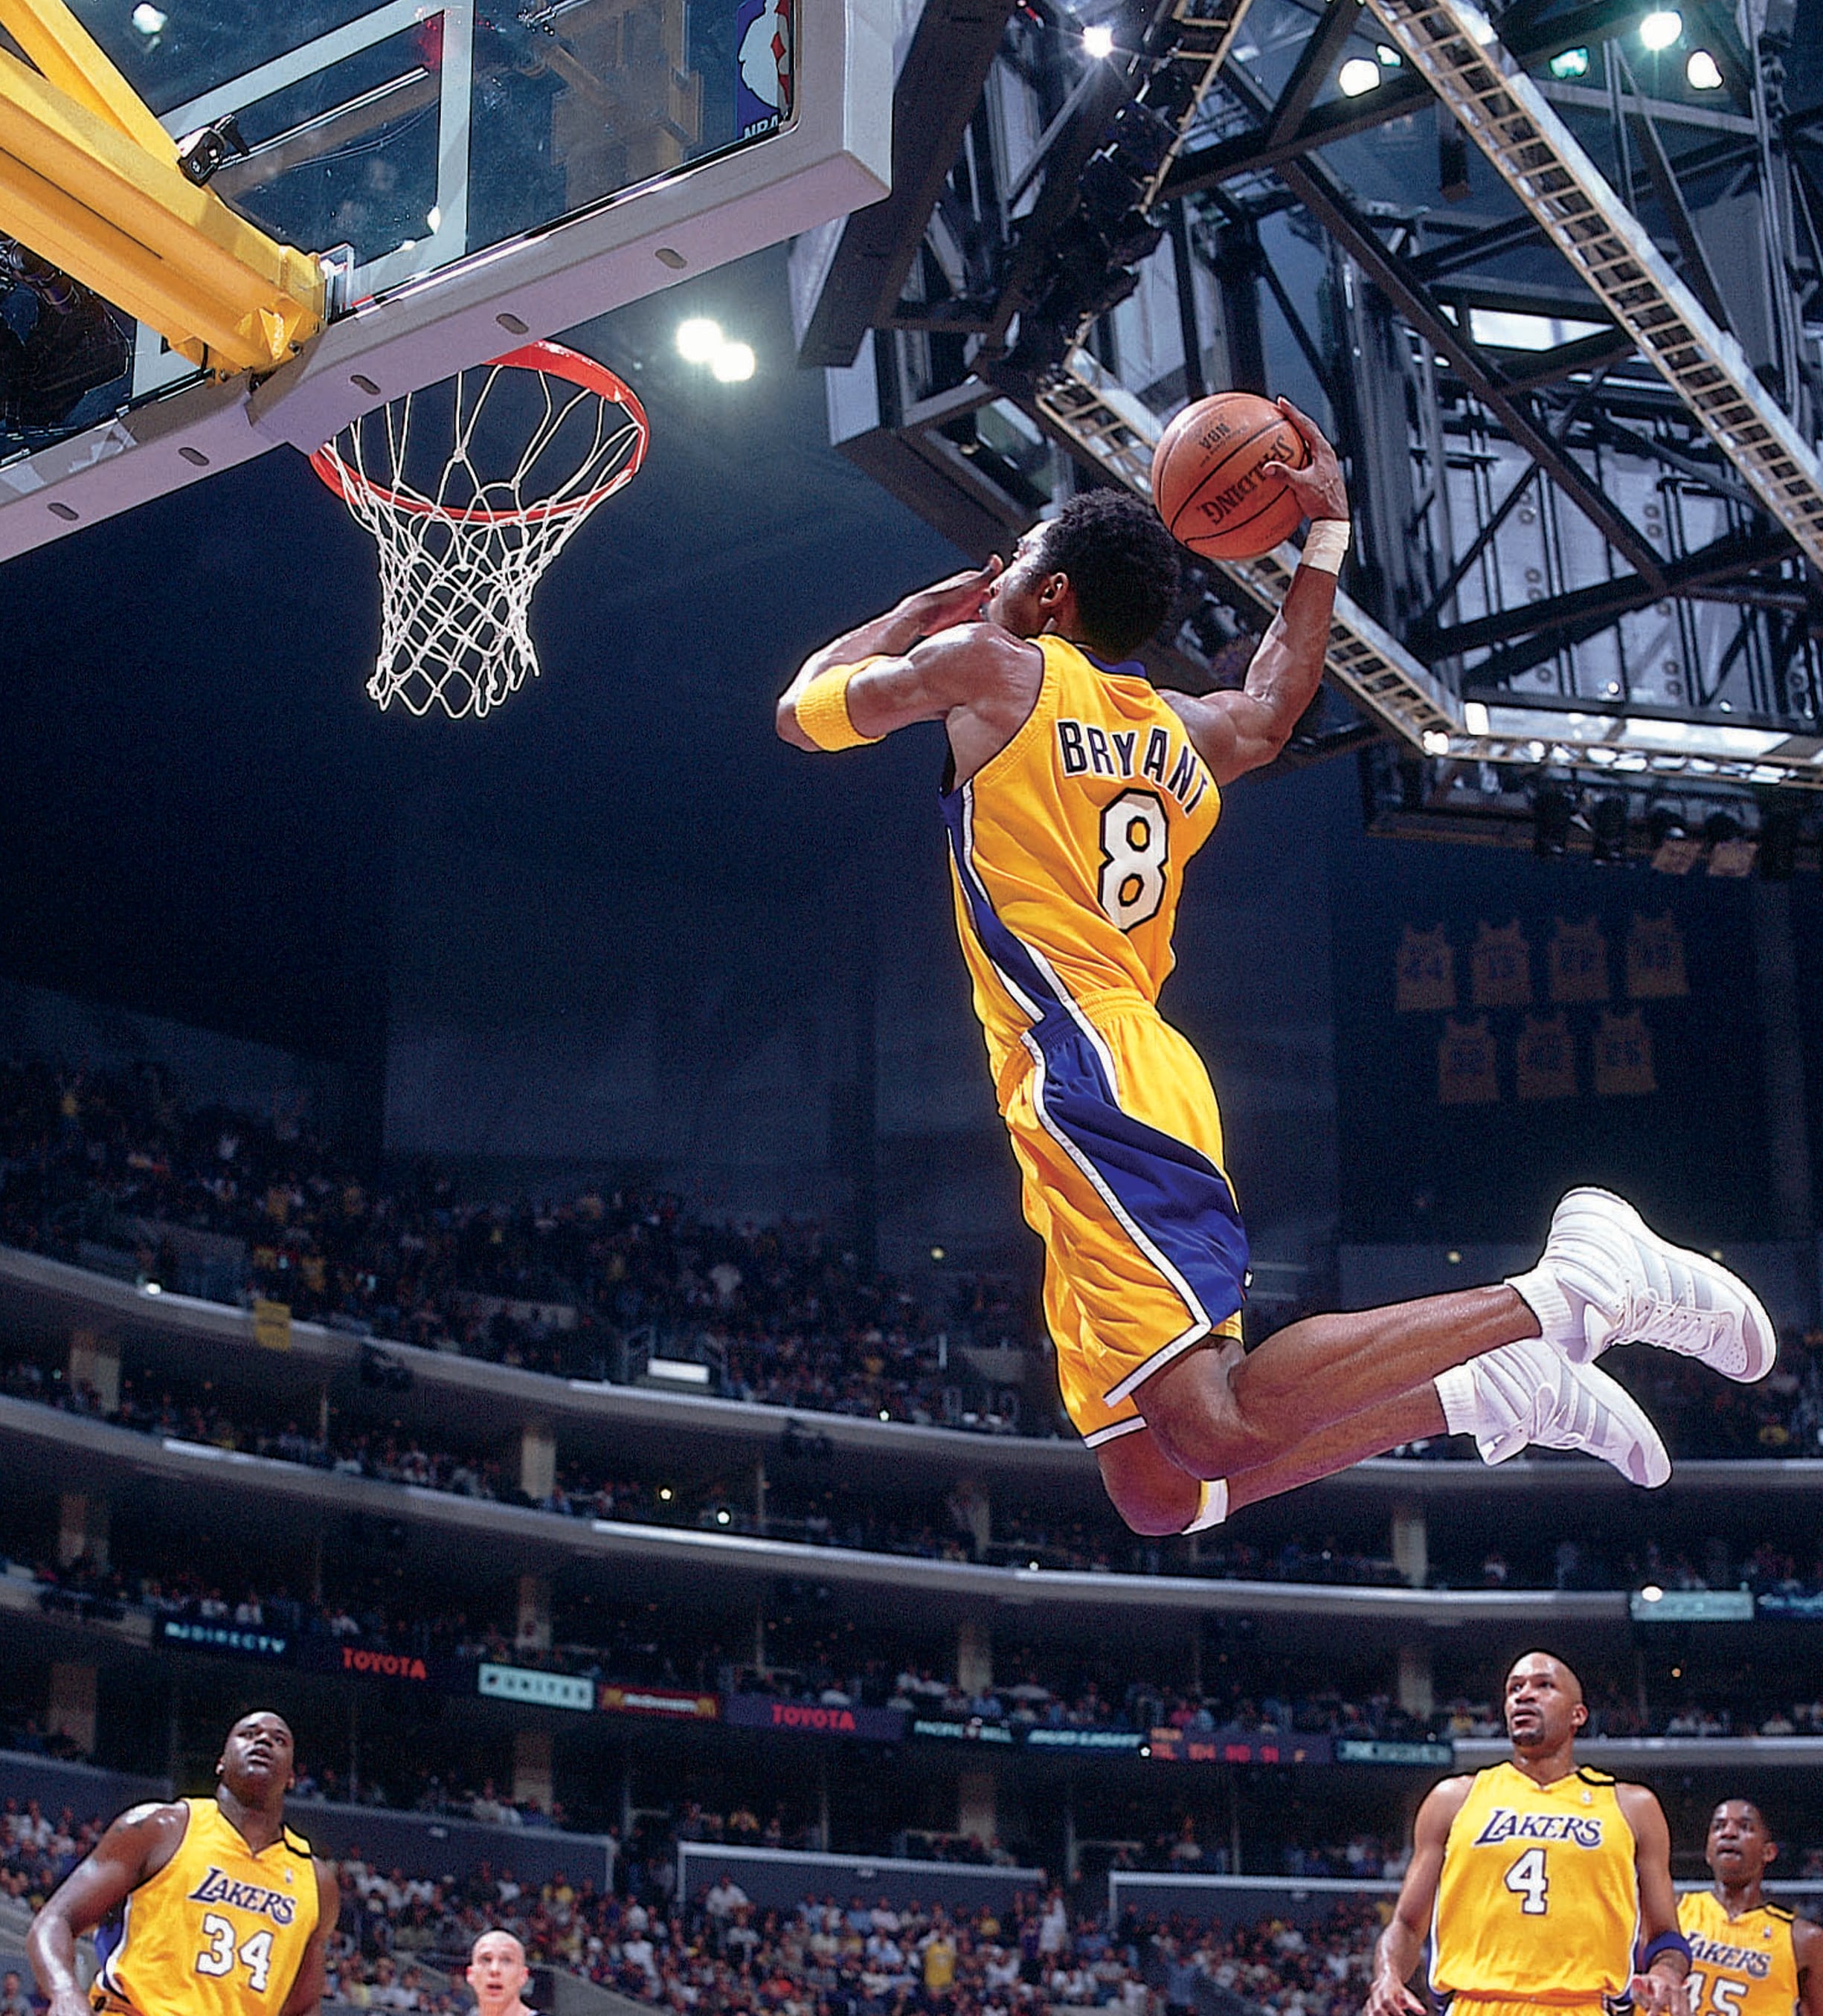 When Kobe Bryant showed up in the Lakers warm up shirt and became the  youngest NBA Dunk Contest winner in history! #MambaForever